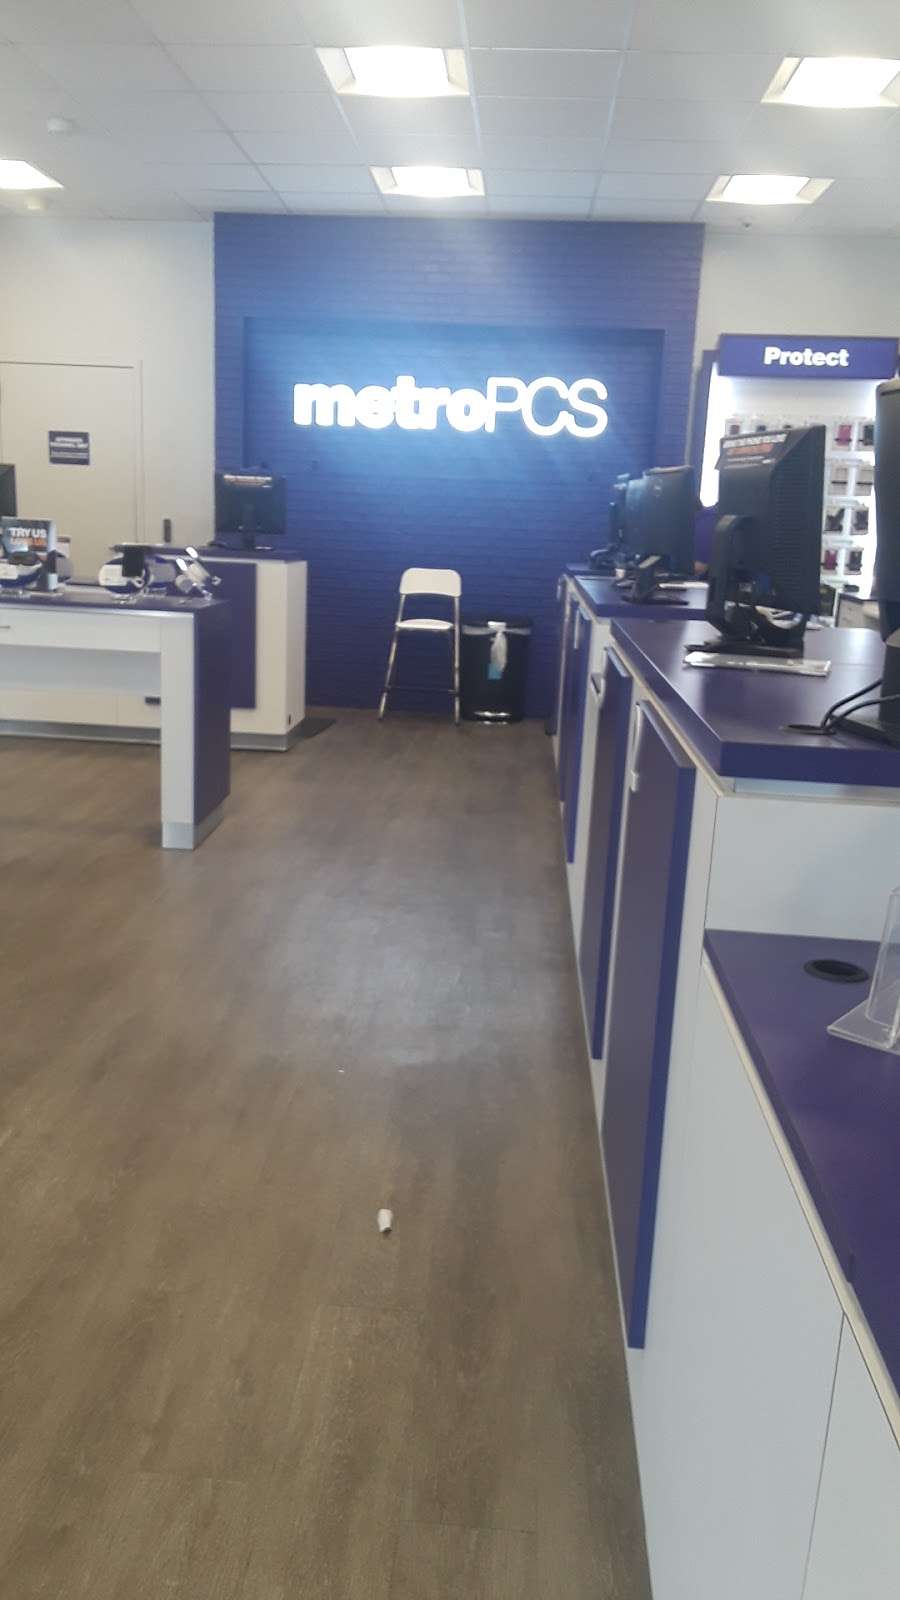 Metro by T-Mobile | 1041 E, Capitol Expy, San Jose, CA 95121, USA | Phone: (408) 361-0341